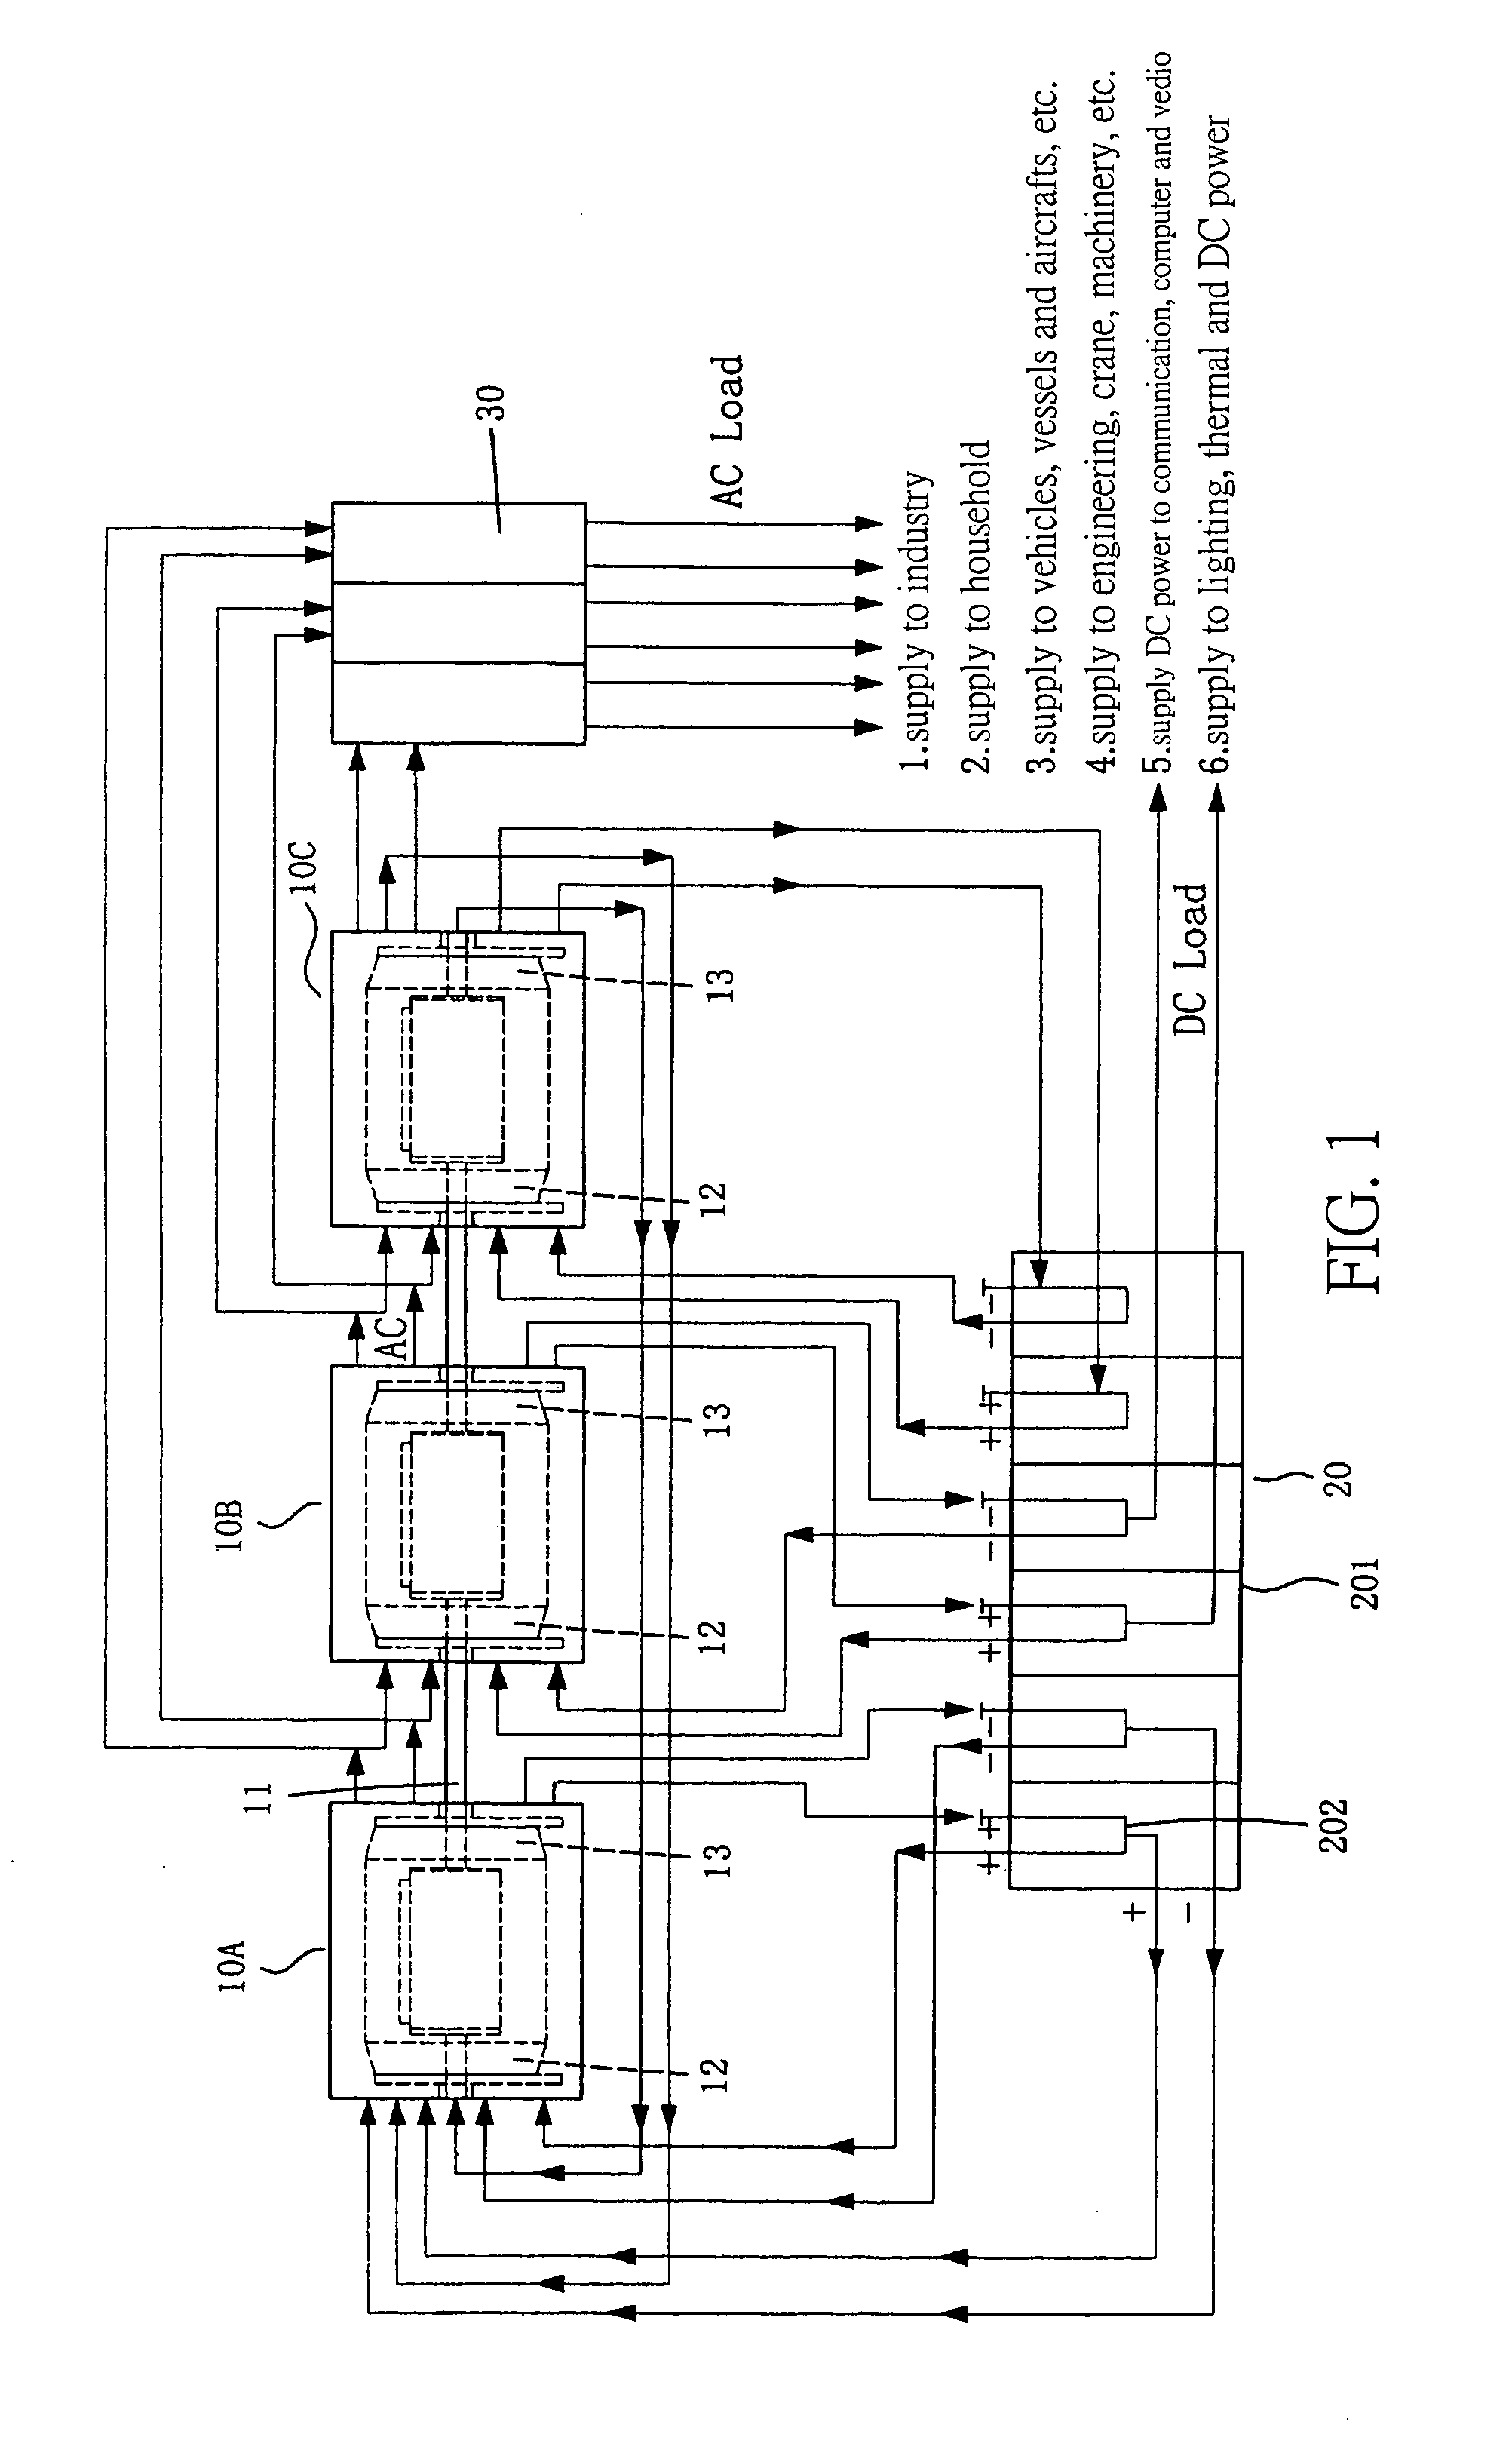 Self-contained intelligent cascaded synchronous electric motor-generator tandems of cumulative compound excitation